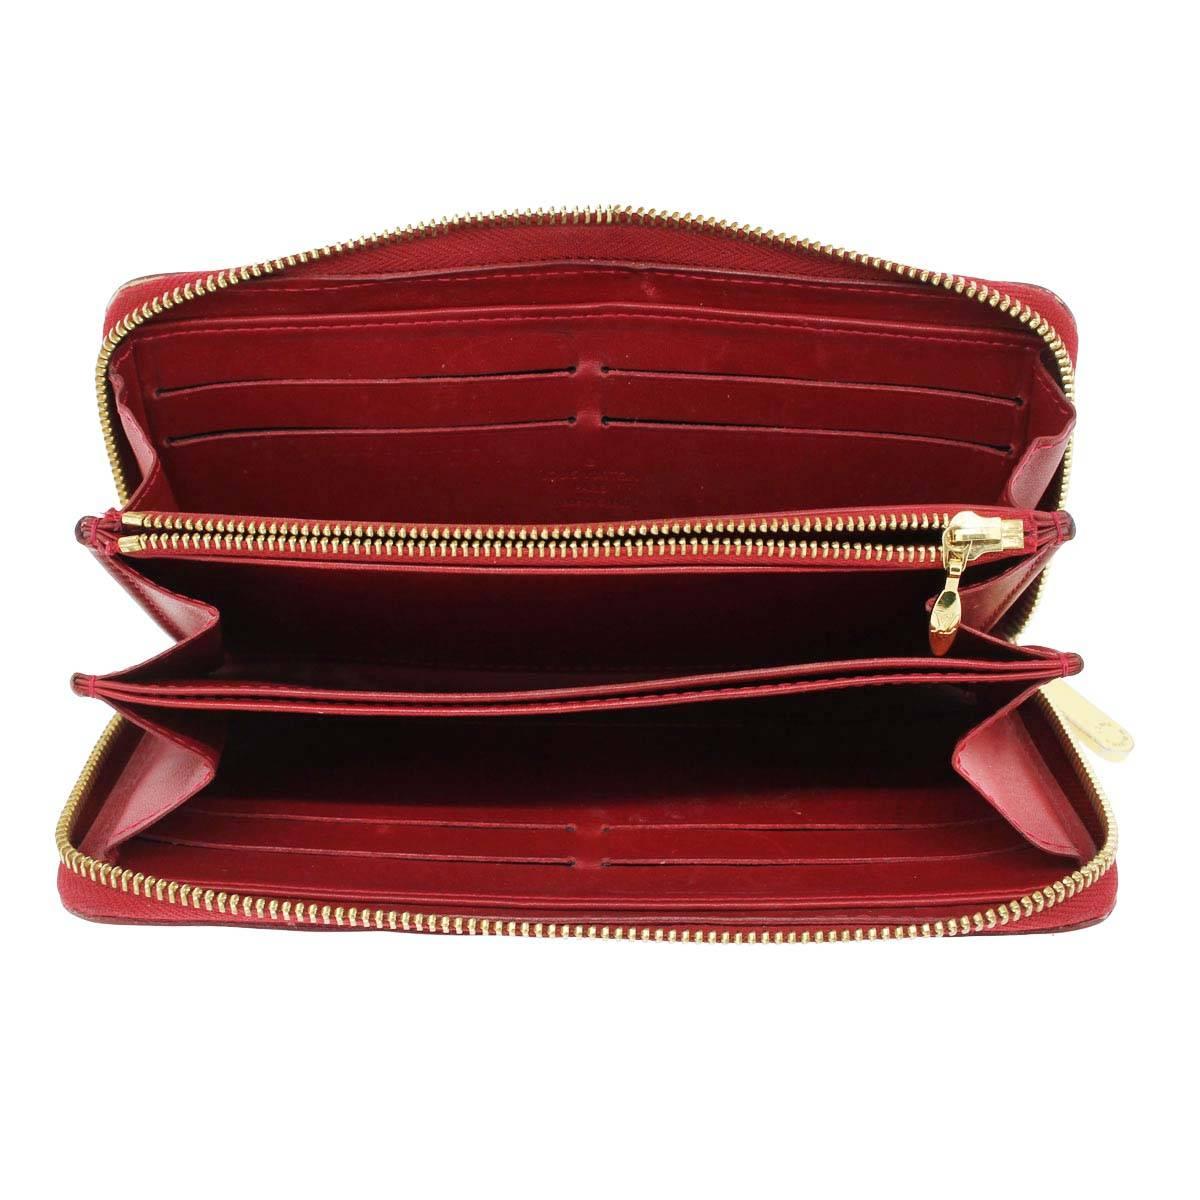 Women's Louis Vuitton Zippy Wallet Red Vernis Leather in Box